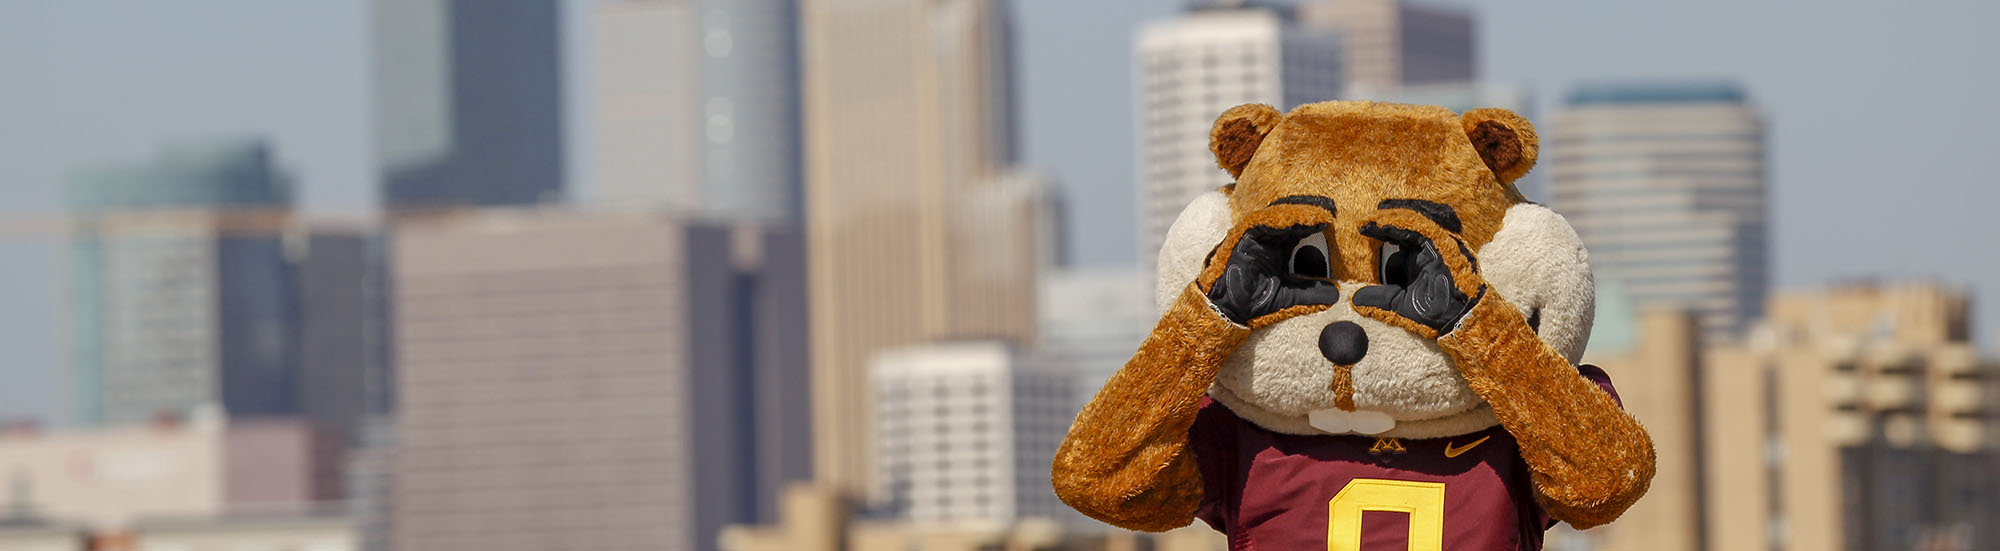 Goldy Gopher uses his hands as binoculars to search for something